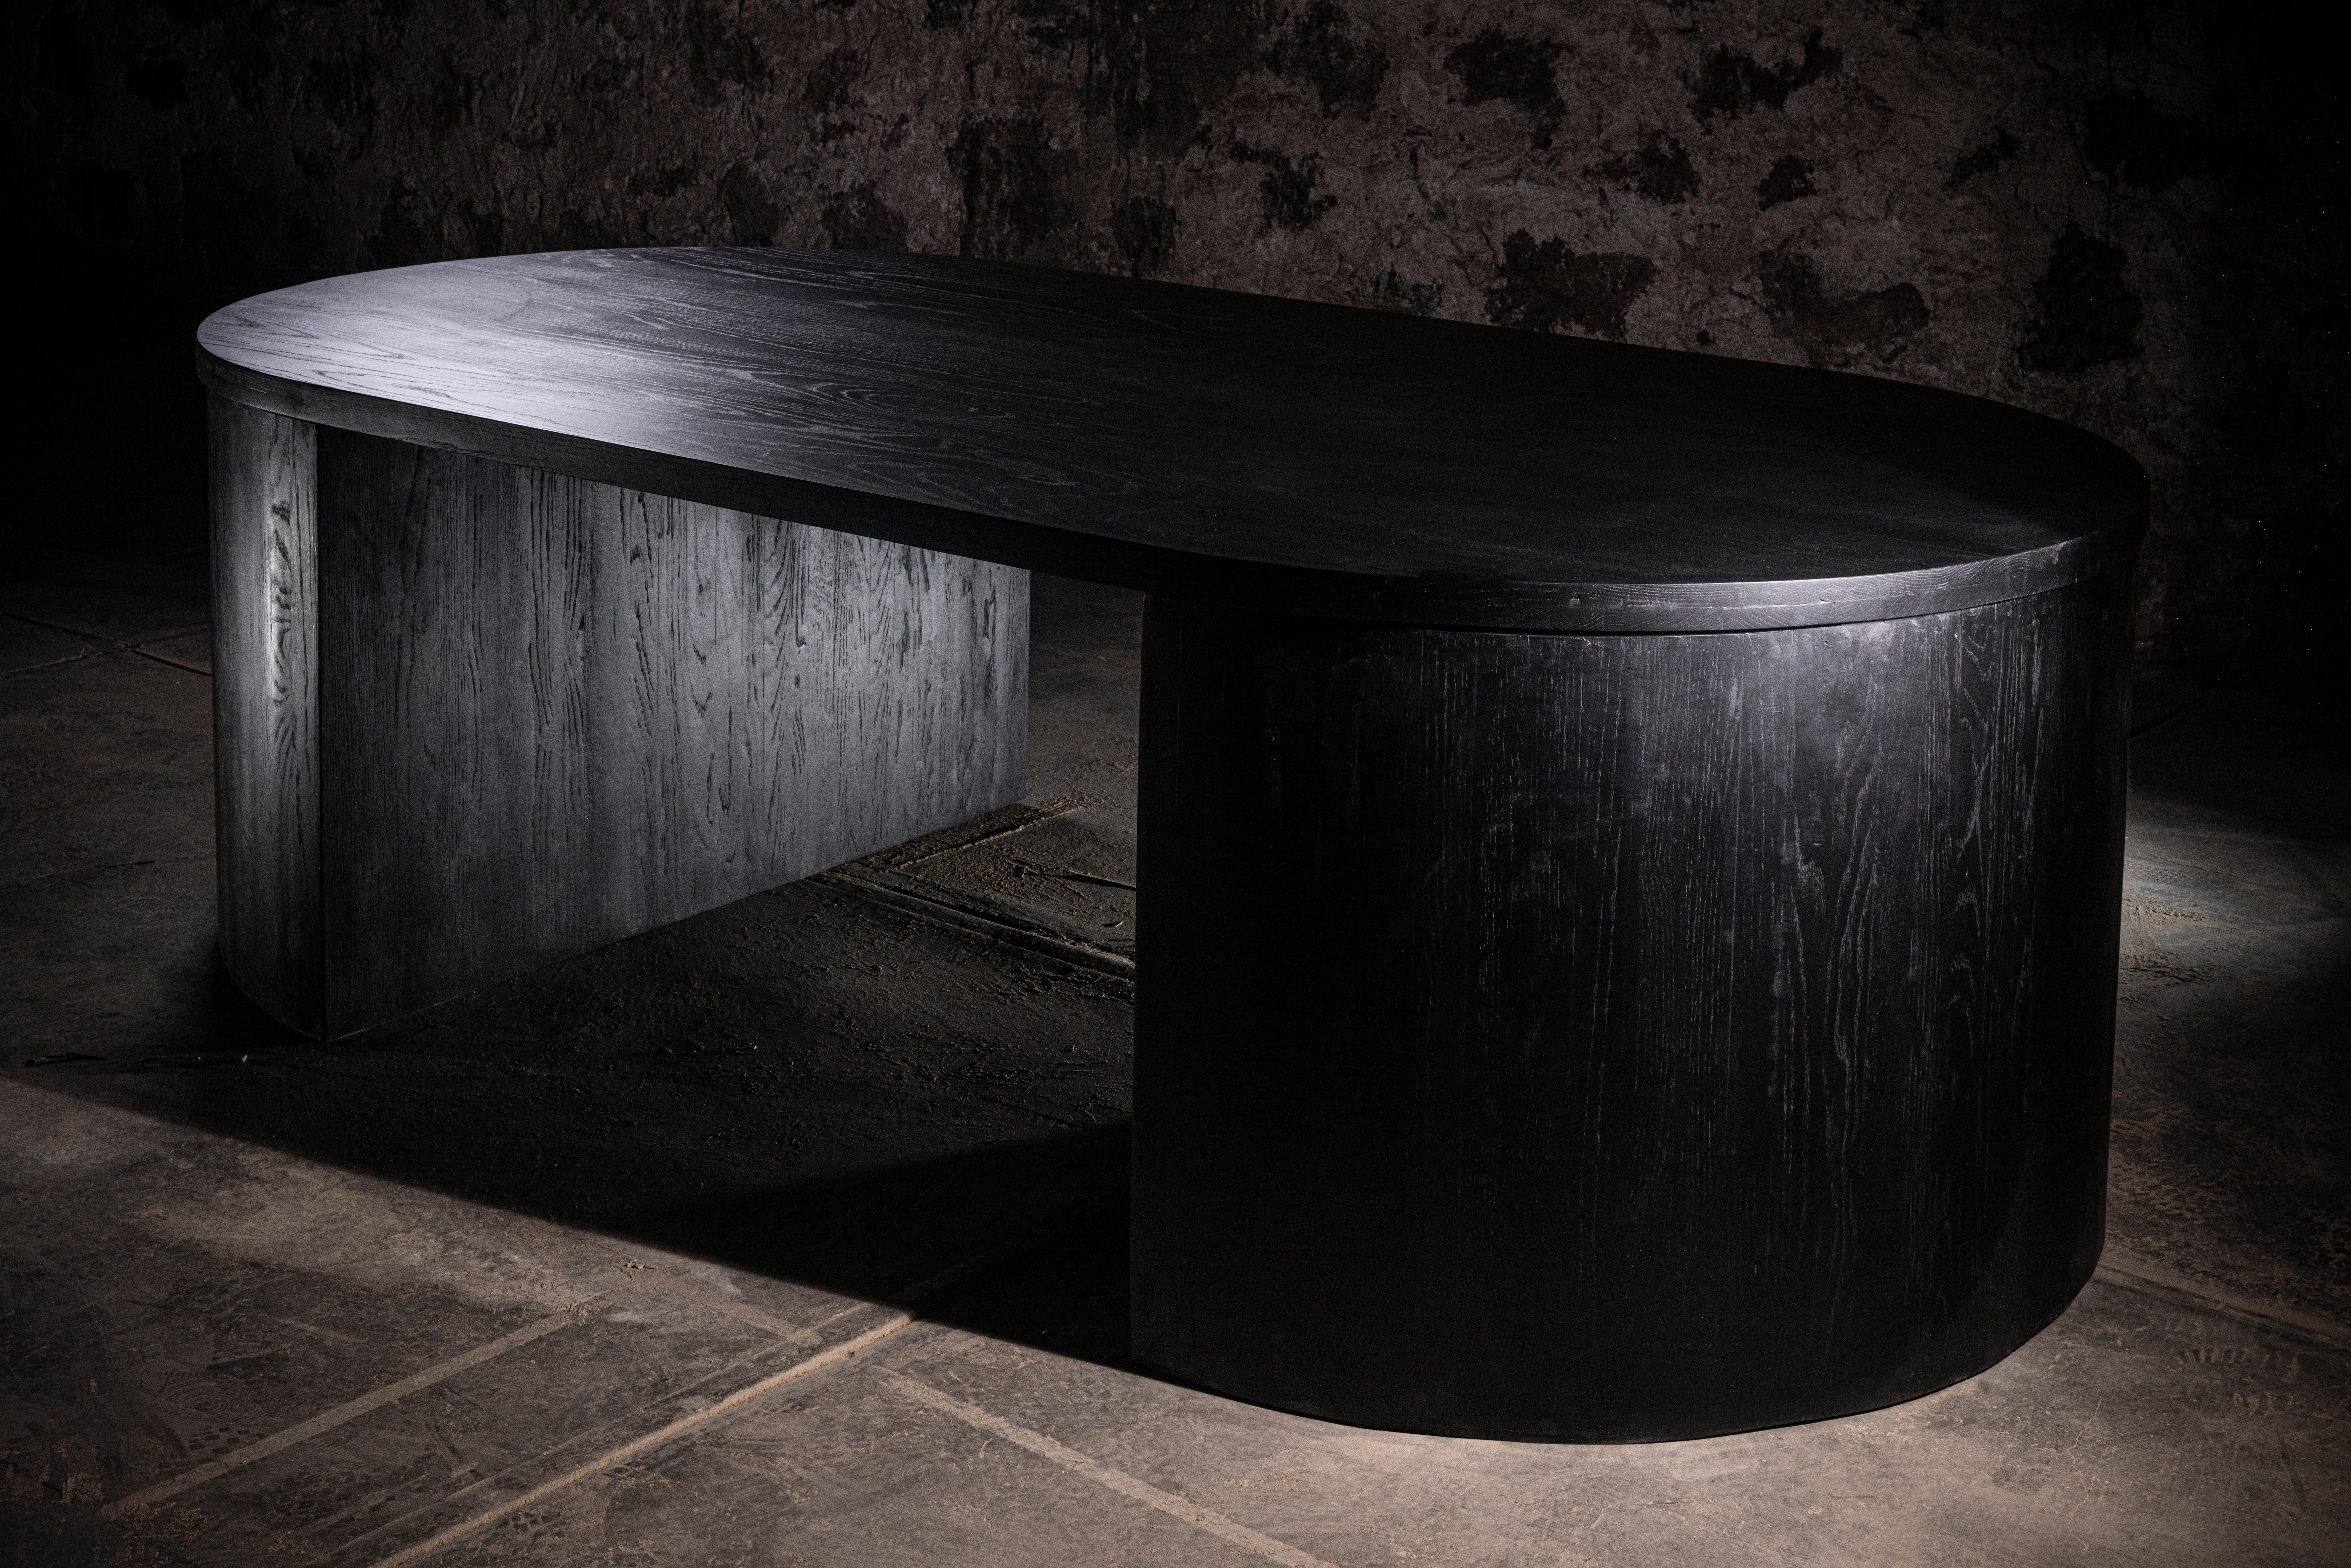 Solid Black Oak Table, constructed in 100% solid oak.
Can be used as a dining, kitchen table or desk.